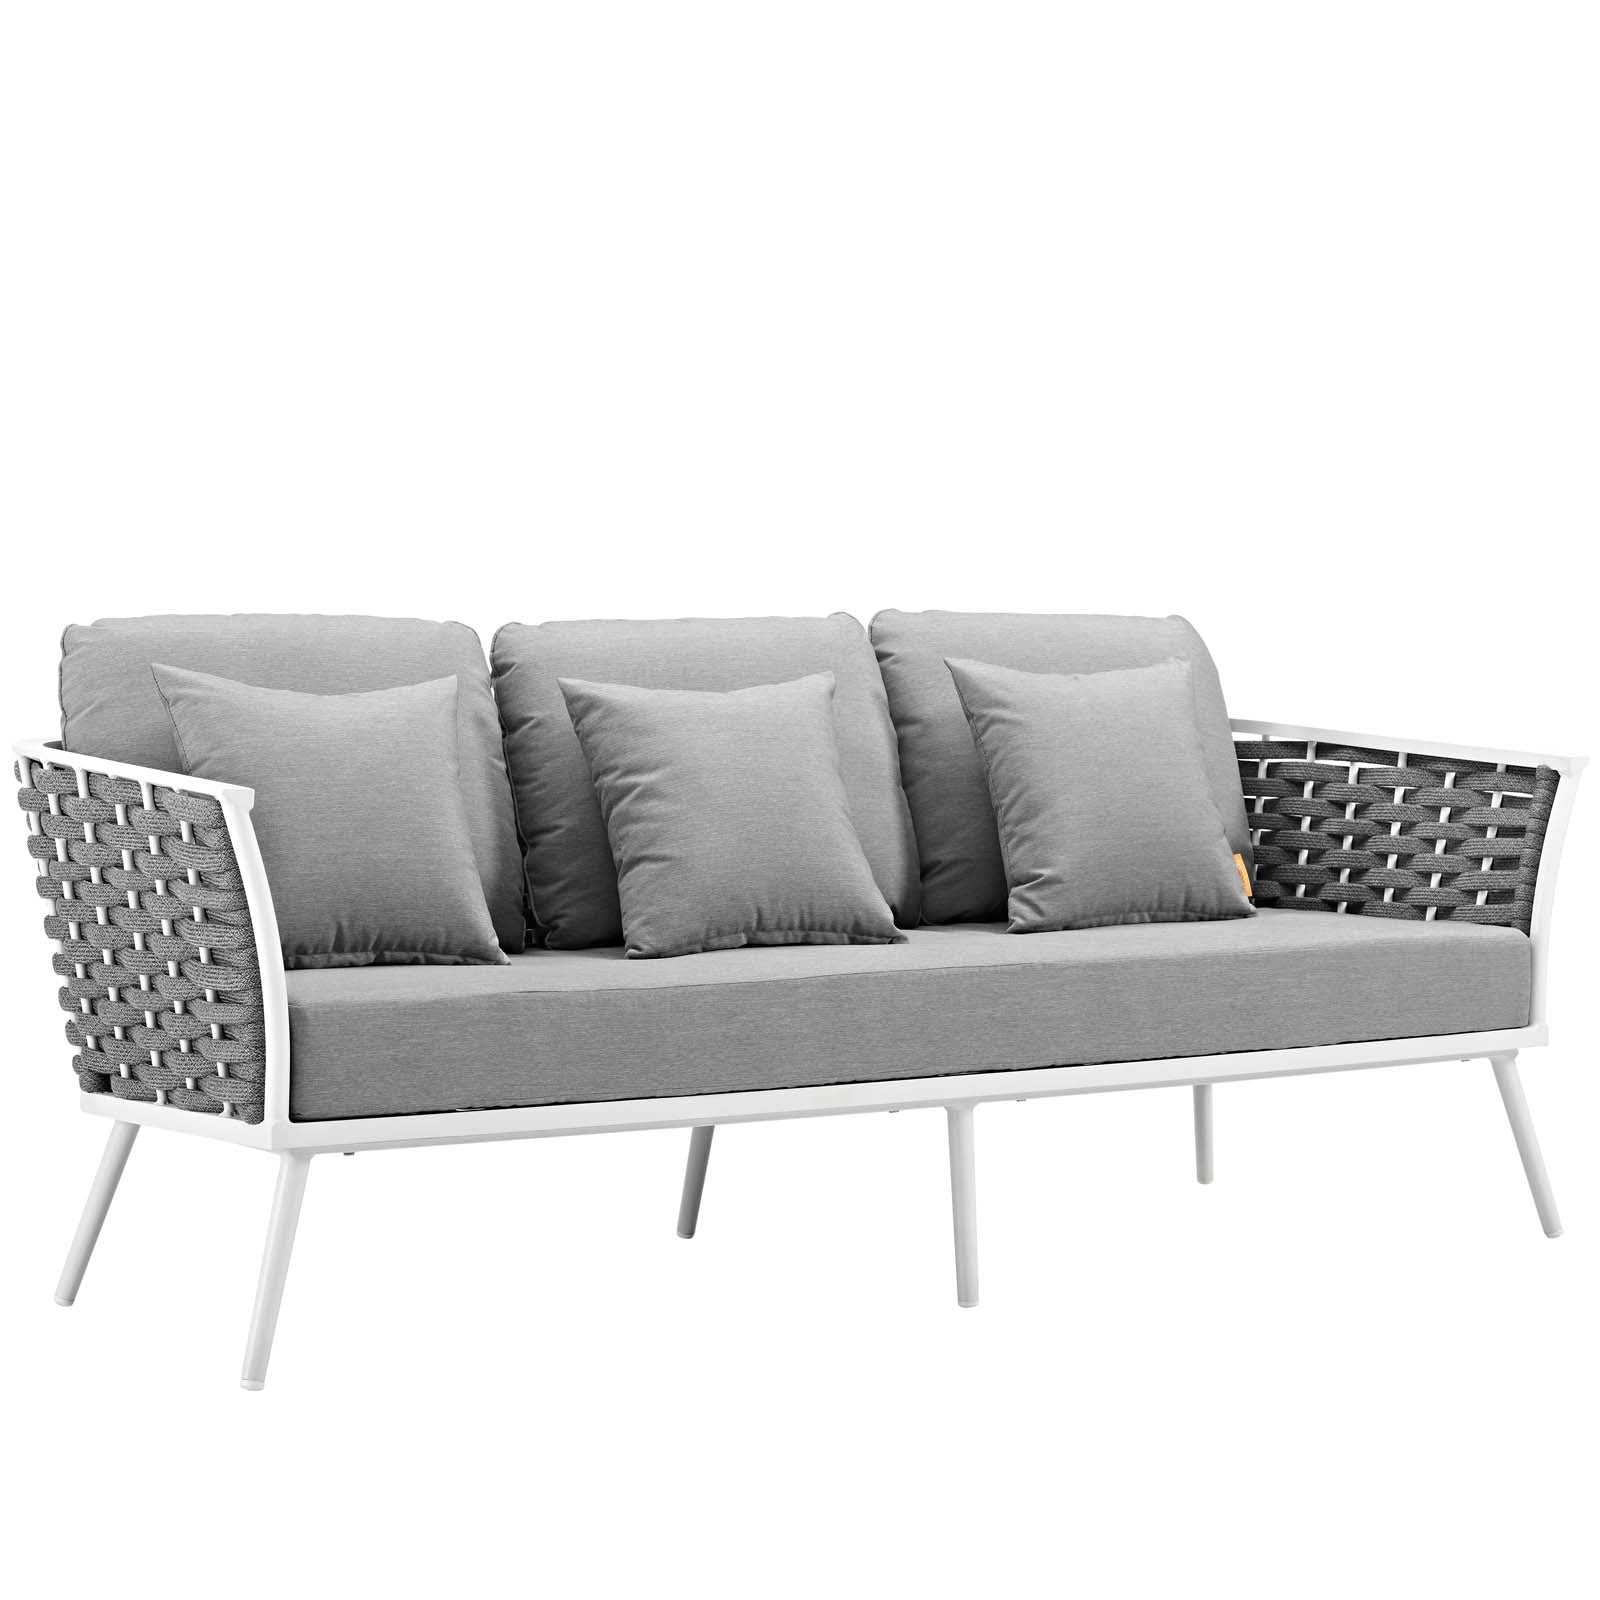 Stance 4 Piece Outdoor Patio Aluminum Sectional Sofa Set - East Shore Modern Home Furnishings